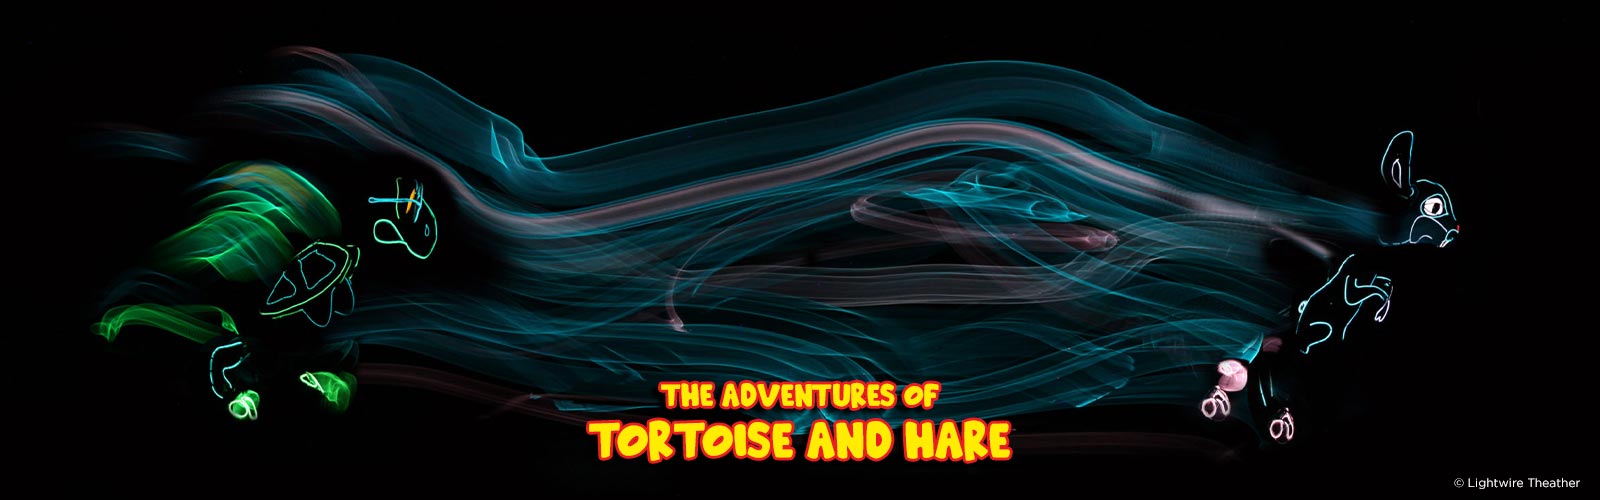 The Adventures of Tortoise and Hare